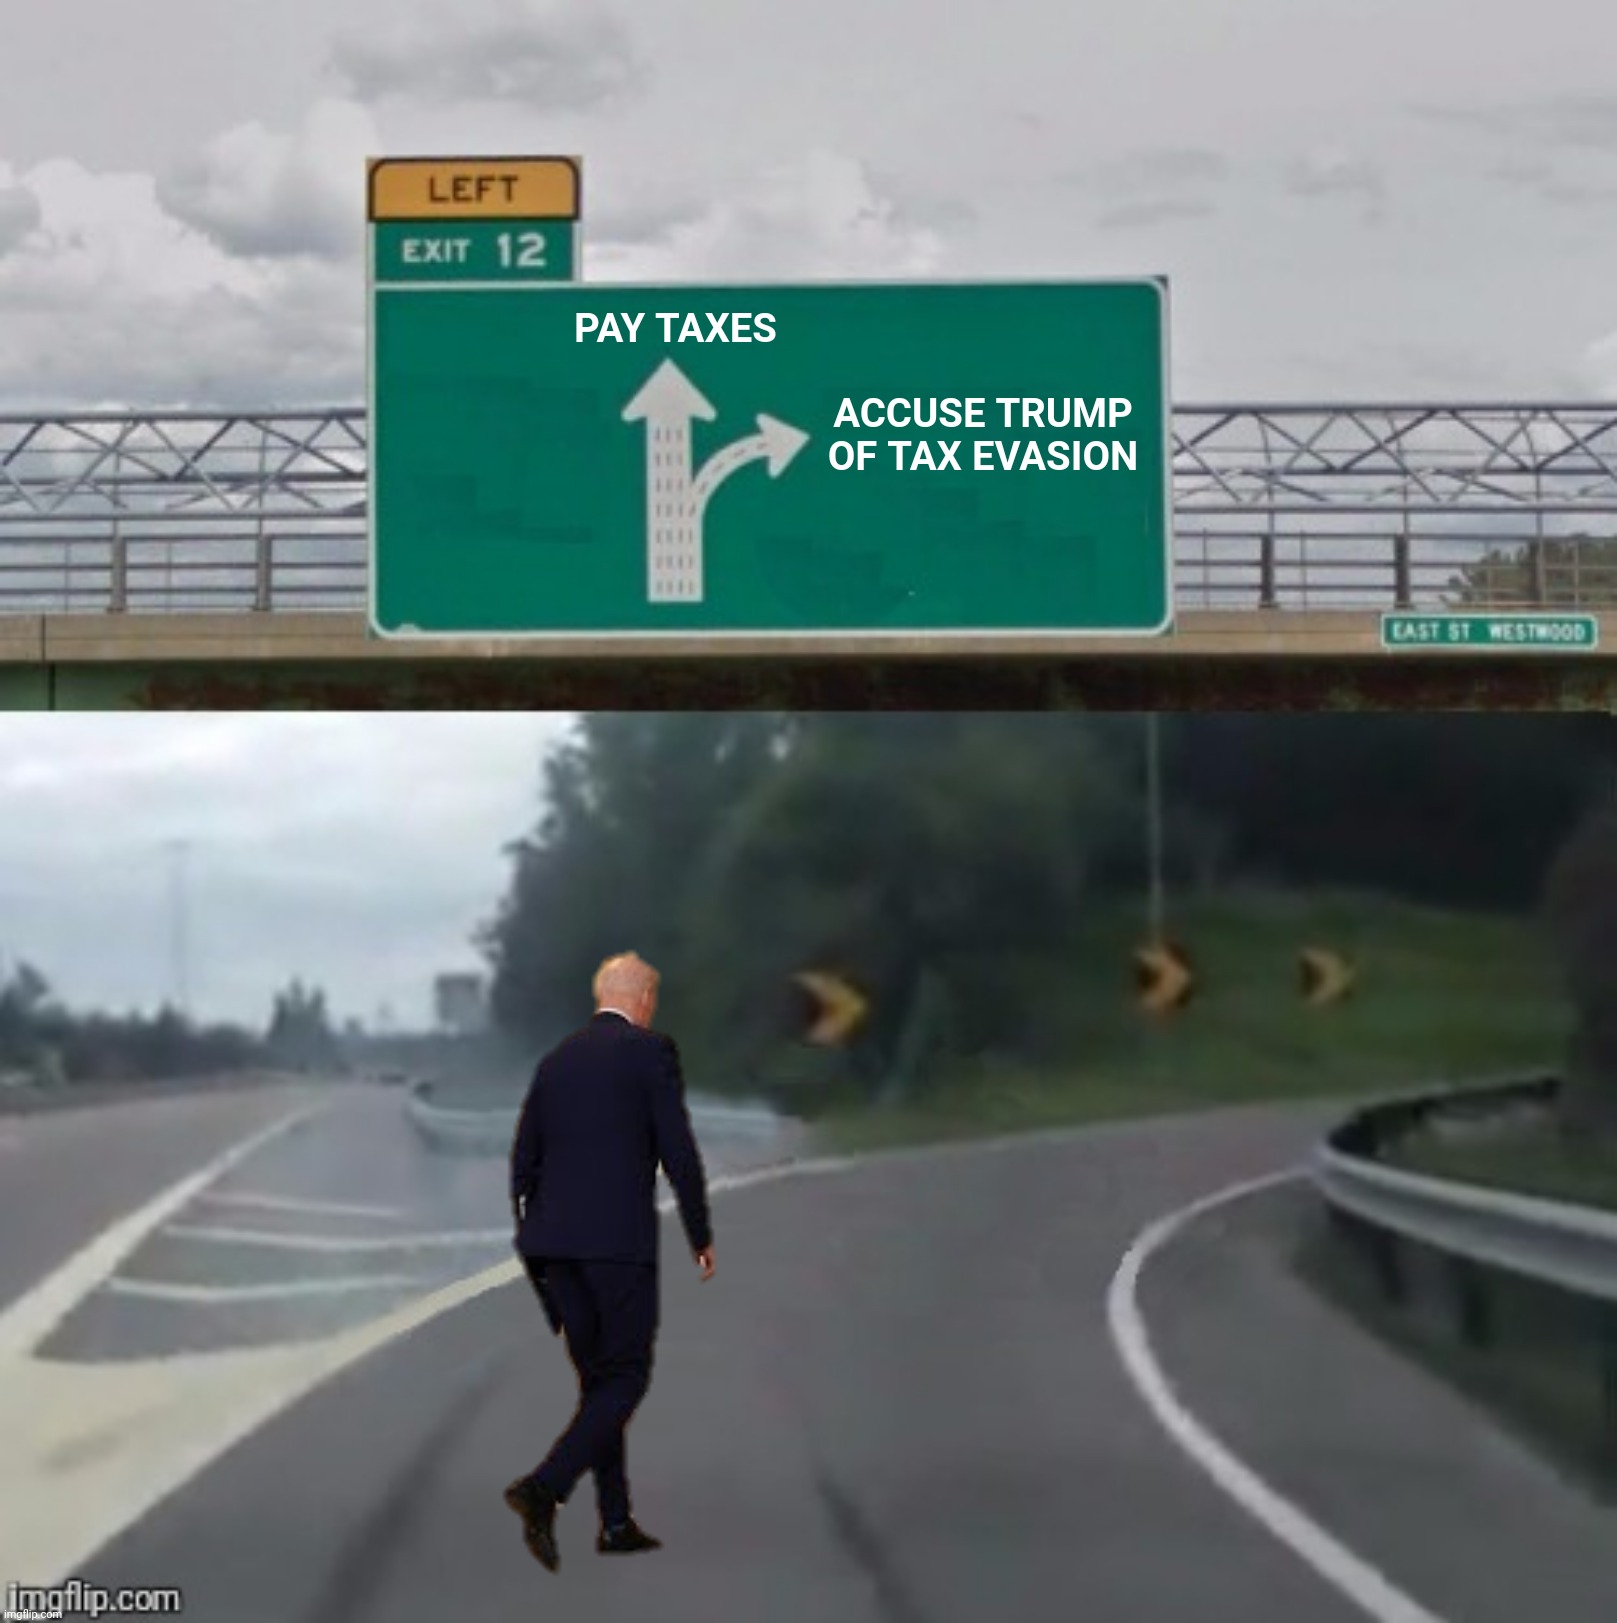 So that's where he's going | PAY TAXES; ACCUSE TRUMP OF TAX EVASION | image tagged in bad photoshop,left exit 12 off ramp,joe biden,taxes | made w/ Imgflip meme maker